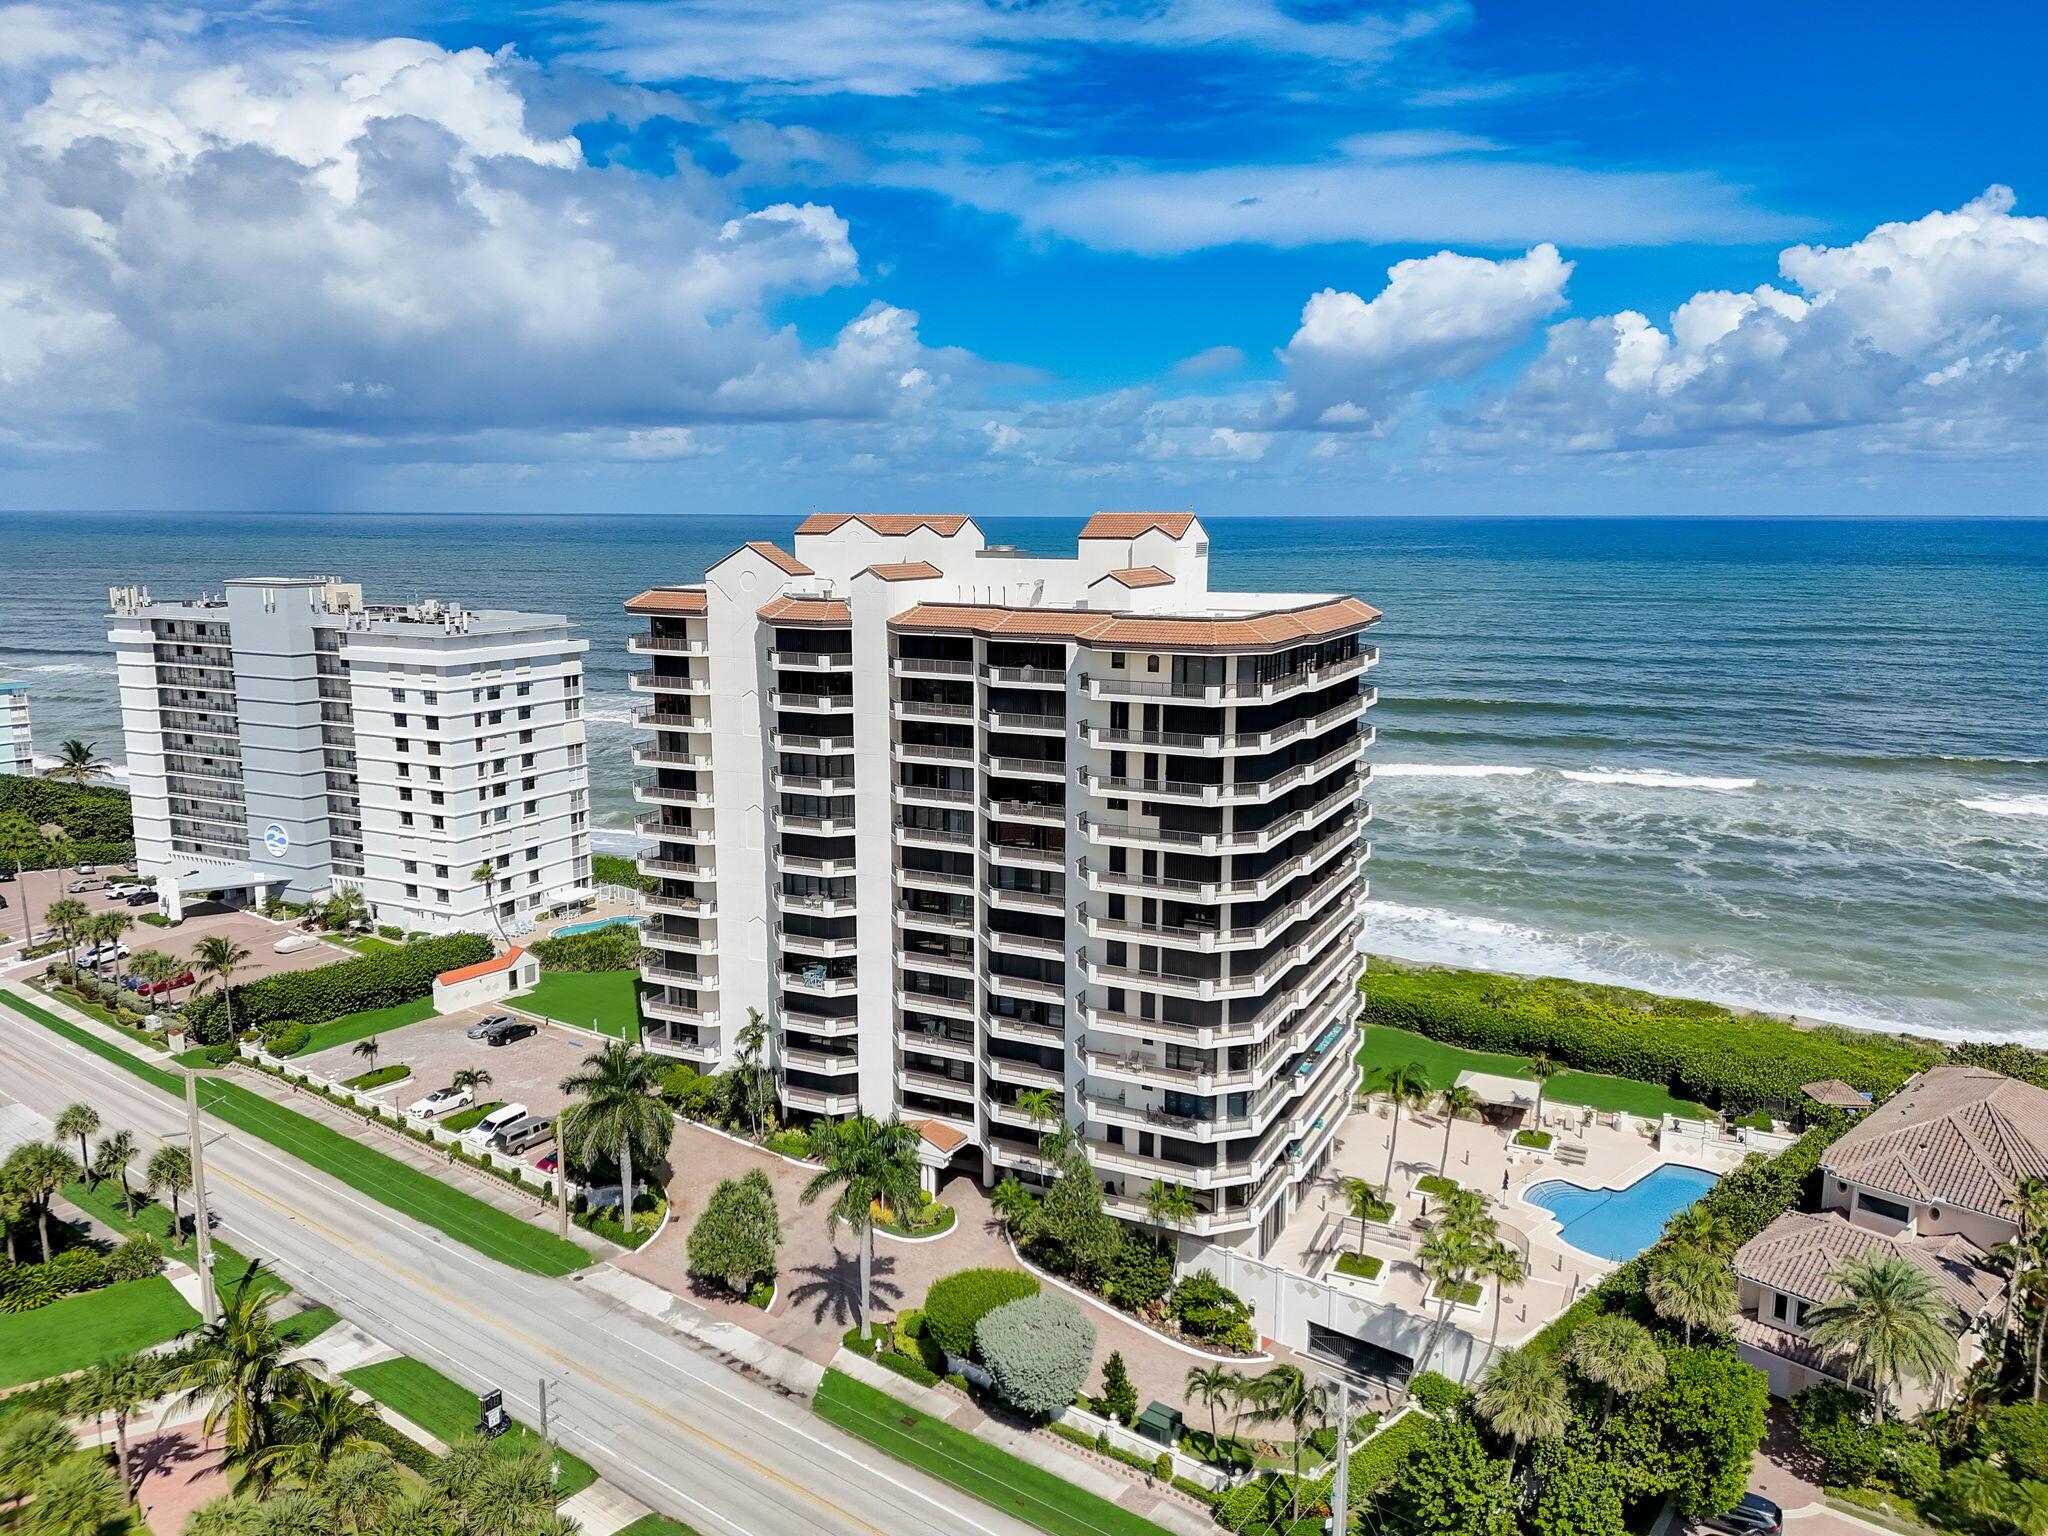 Beautifully remodeled 3 Bed/ 4 Bath Oceanfront condo. This is the best view in Juno. The Waterfront is the most sought after building in Juno Beach. Direct oceanfront living w/ exceptional sunrise and sunset views w/ a private elevator to the unit, 2 coveted garage parking and private beach access. The unit boasts quartzite countertops, titanium engineered wood floors, Downsview custom cabinets, Mr. Steam shower, TS fireplace, MTI Whirlpool, Hunter Douglass remote blinds, Sikorsky chandeliers, induction stove, Thermador refrigerator, GE monogram range, wine fridge, ice-maker, accordion shutters, Custom closets, his and hers closet. Building has new roof, sauna, fitness, wine & liquor locker, bike storage, cabanas (for purchase), pool, hot tub, private beach. Pet Friendly.